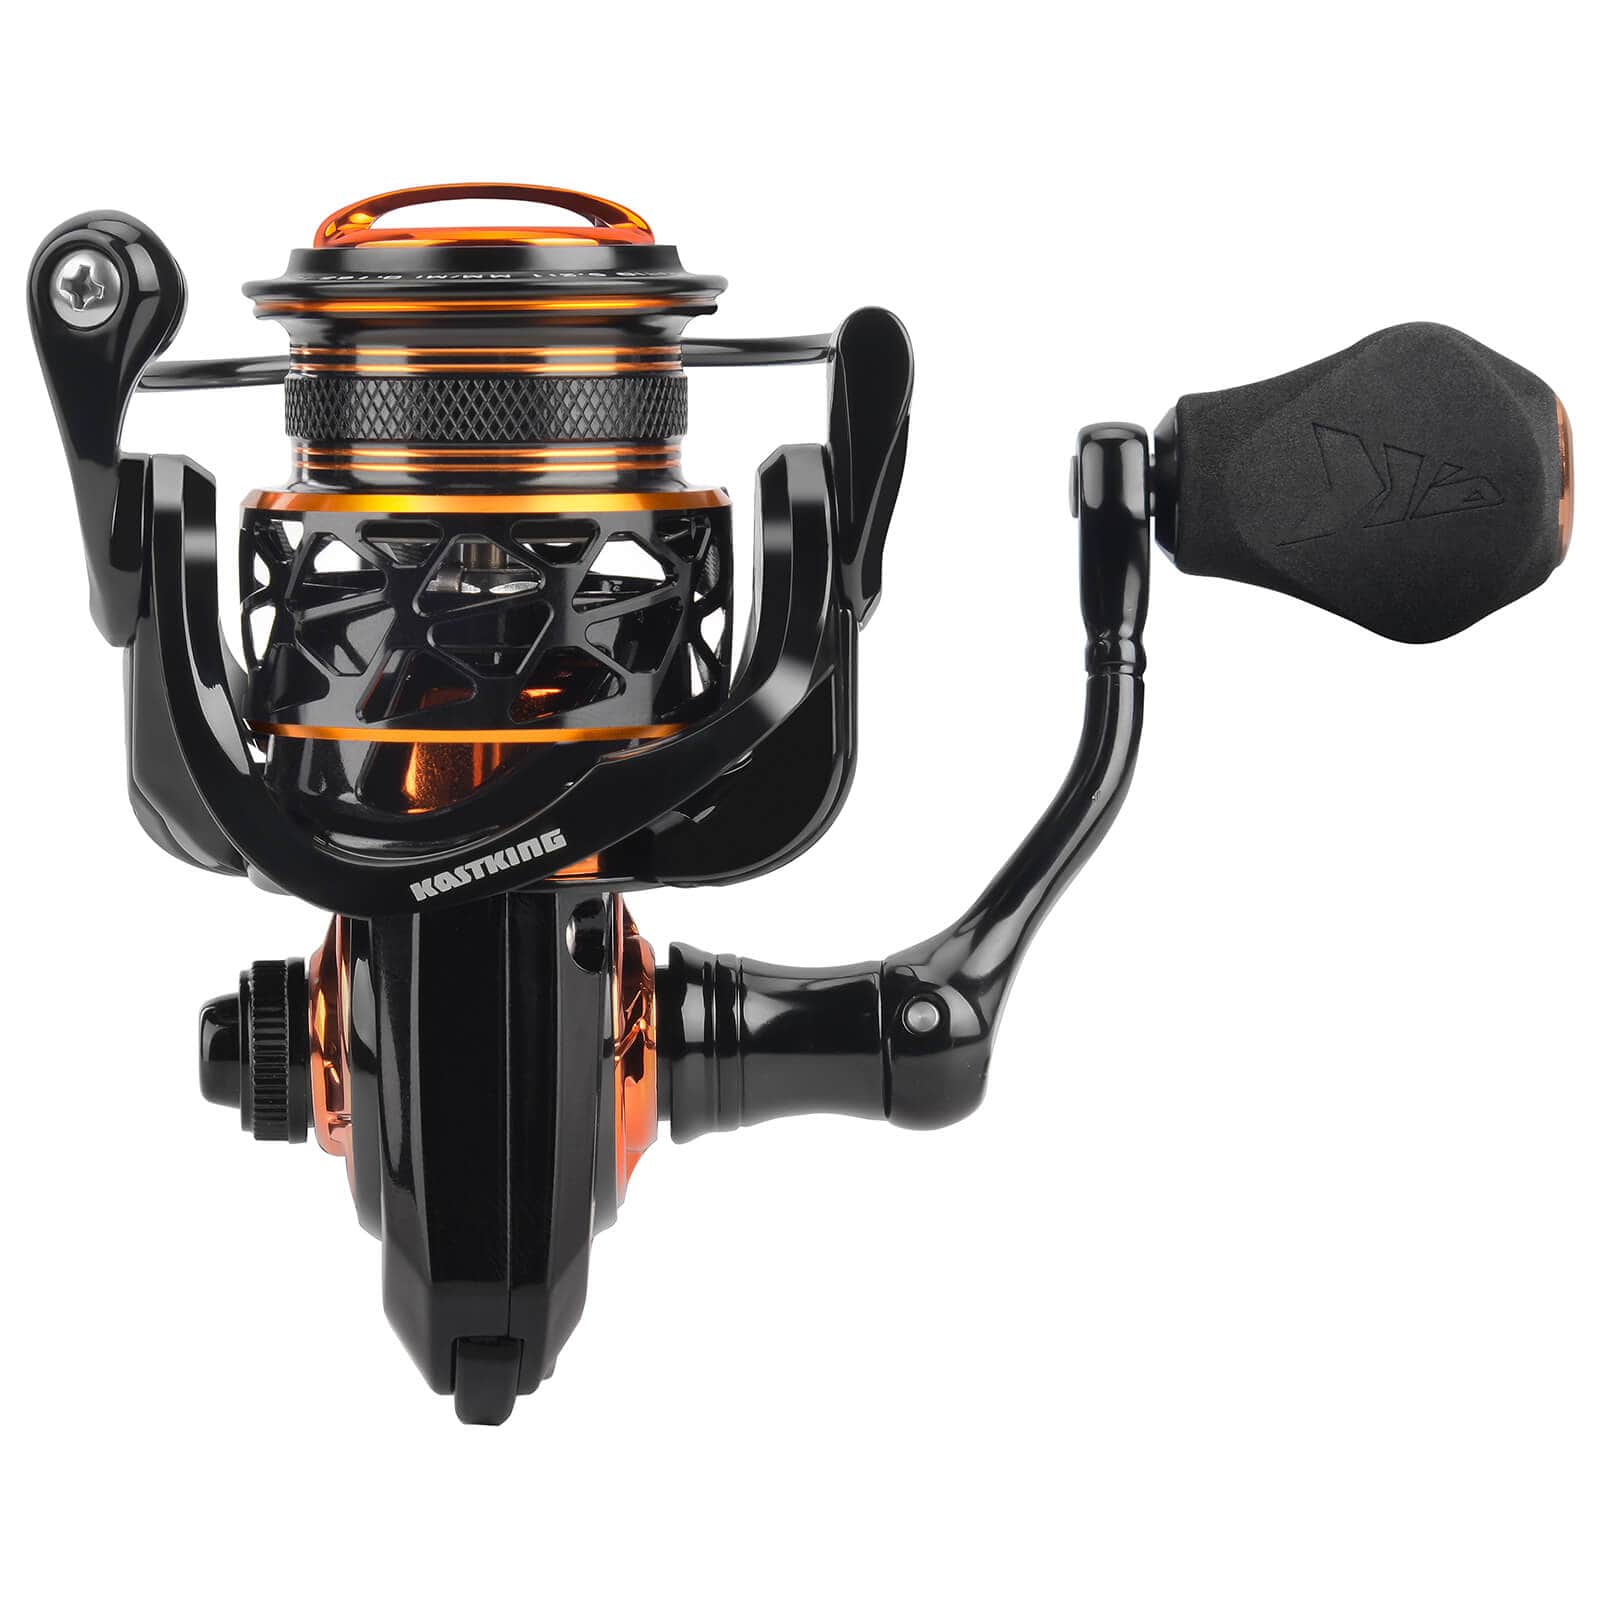 KastKing Zephyr 1000 sfs Spinning Reel . This reel takes finesse fishing to  another level - Shopping - Community